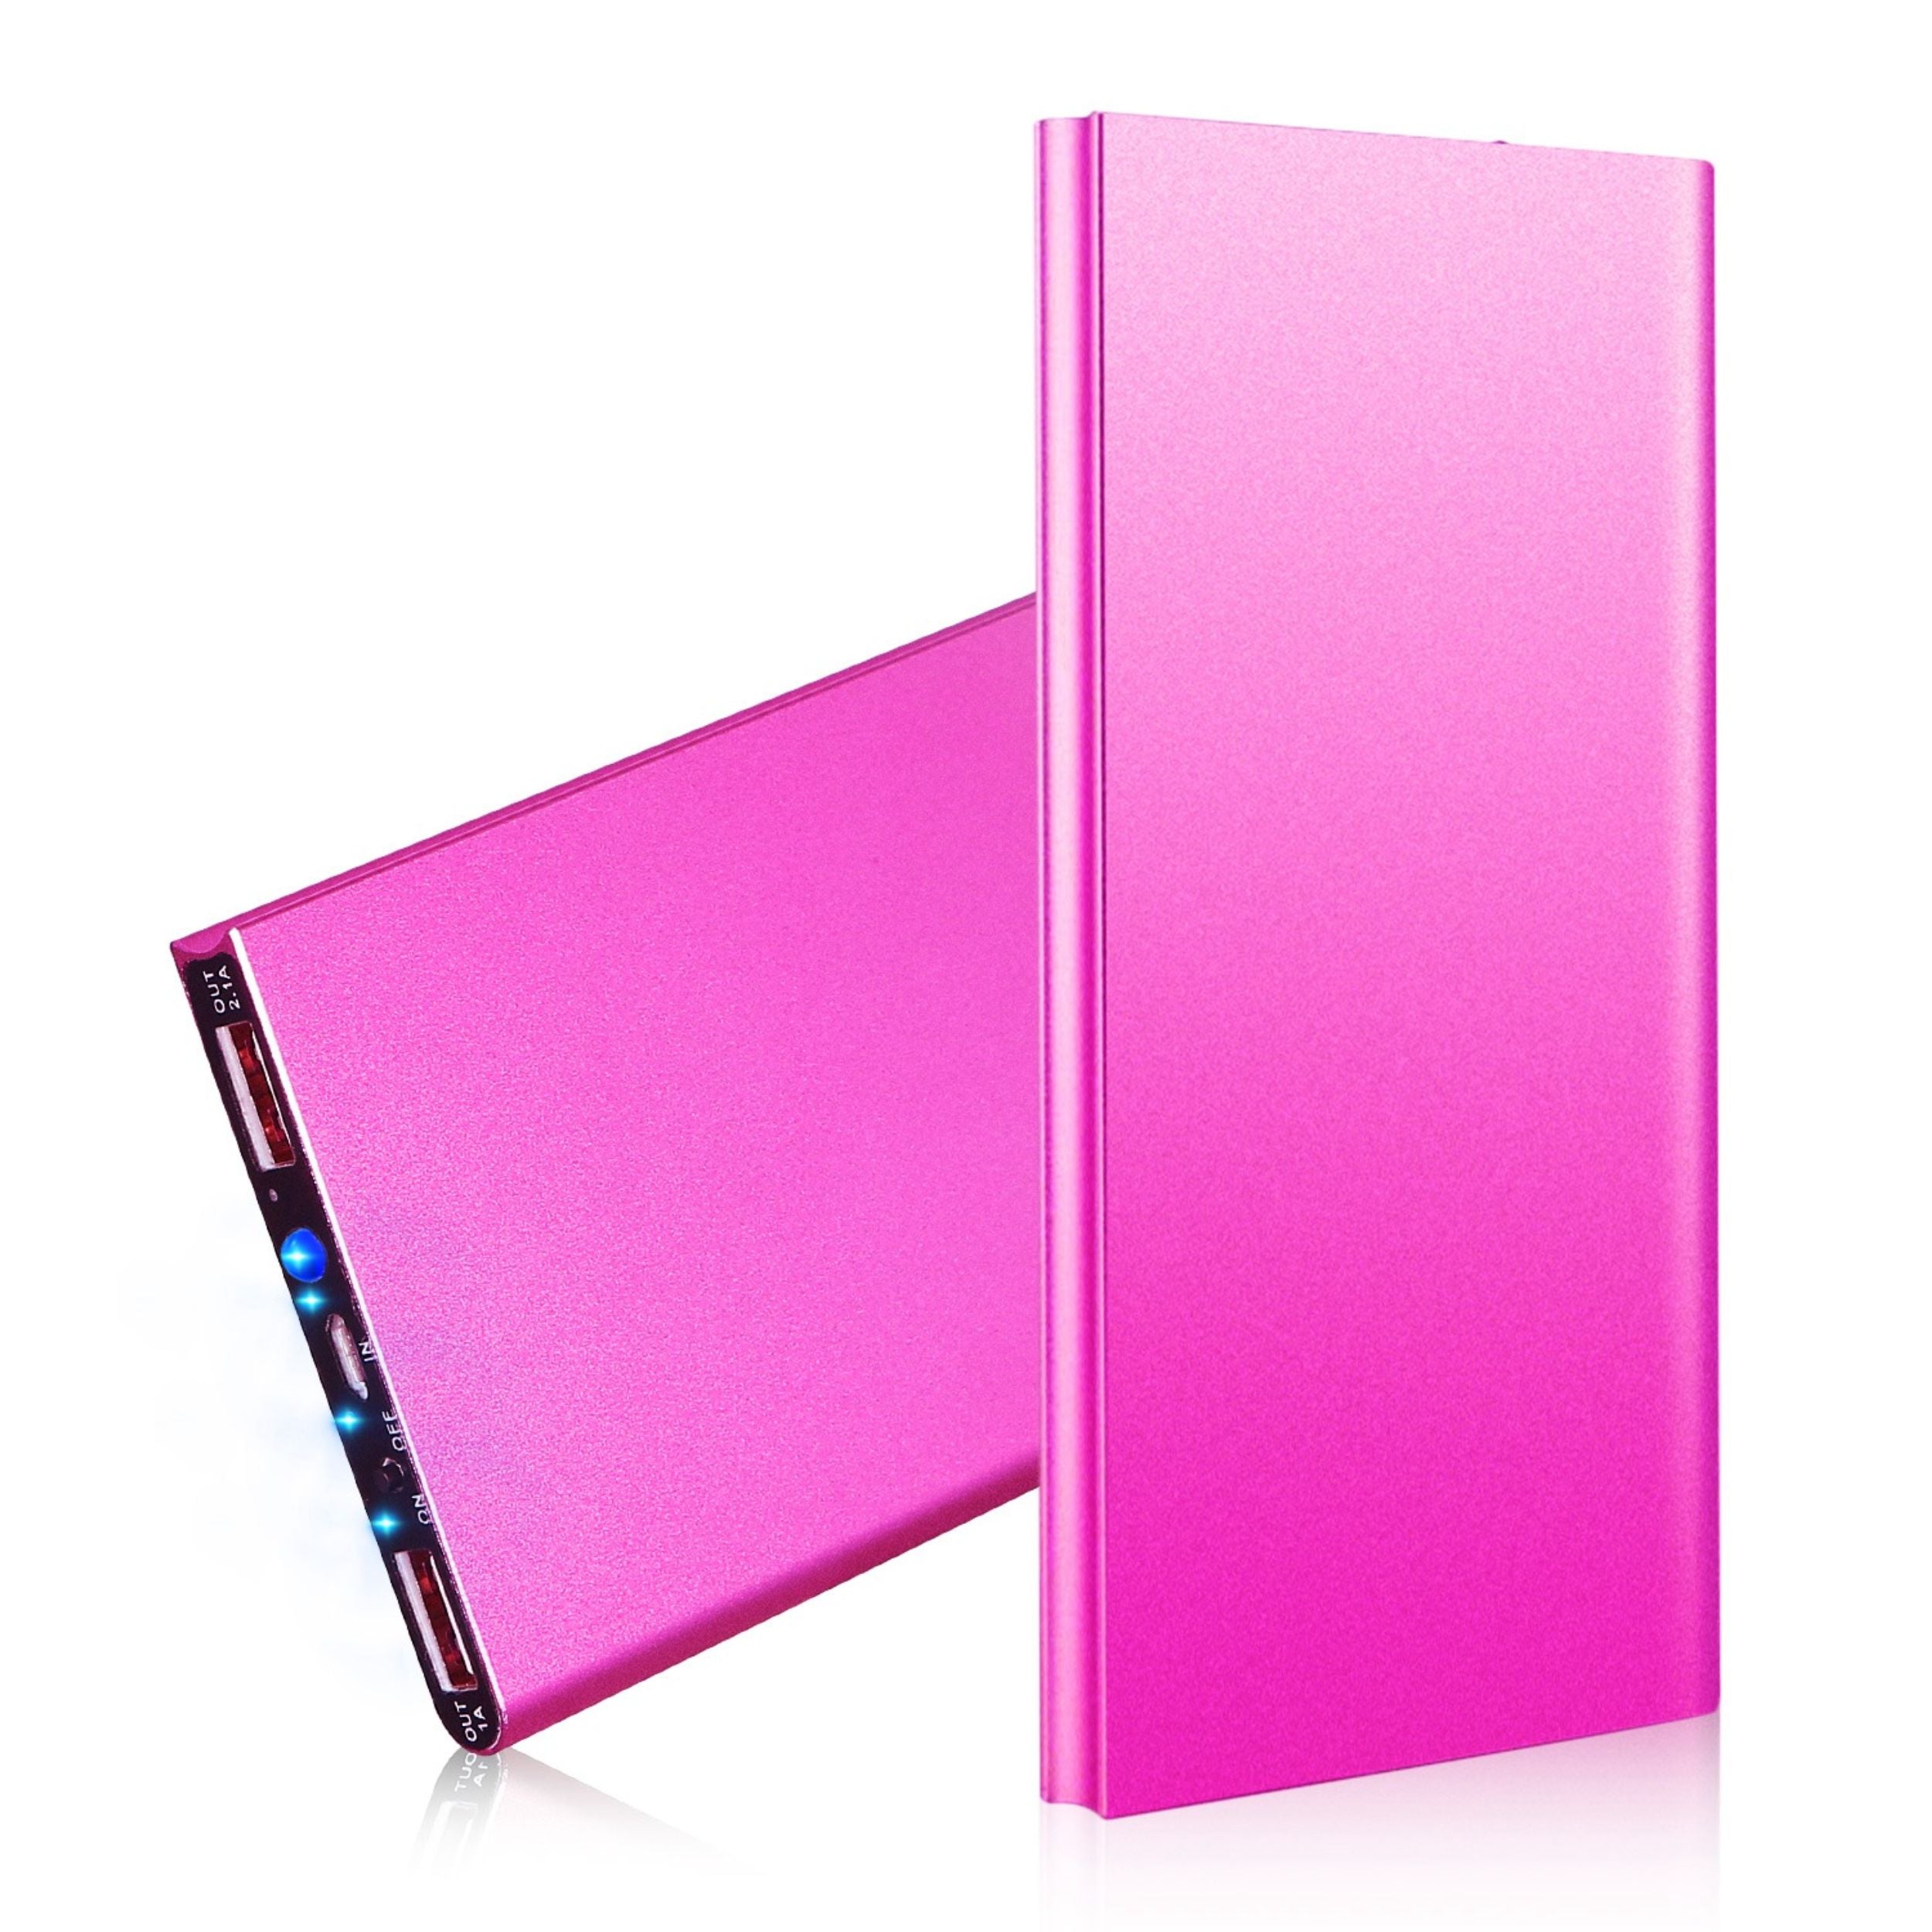 title:20K mAh Ultra-thin Power Bank: Dual USB, Phone Charger;color:Hot Pink